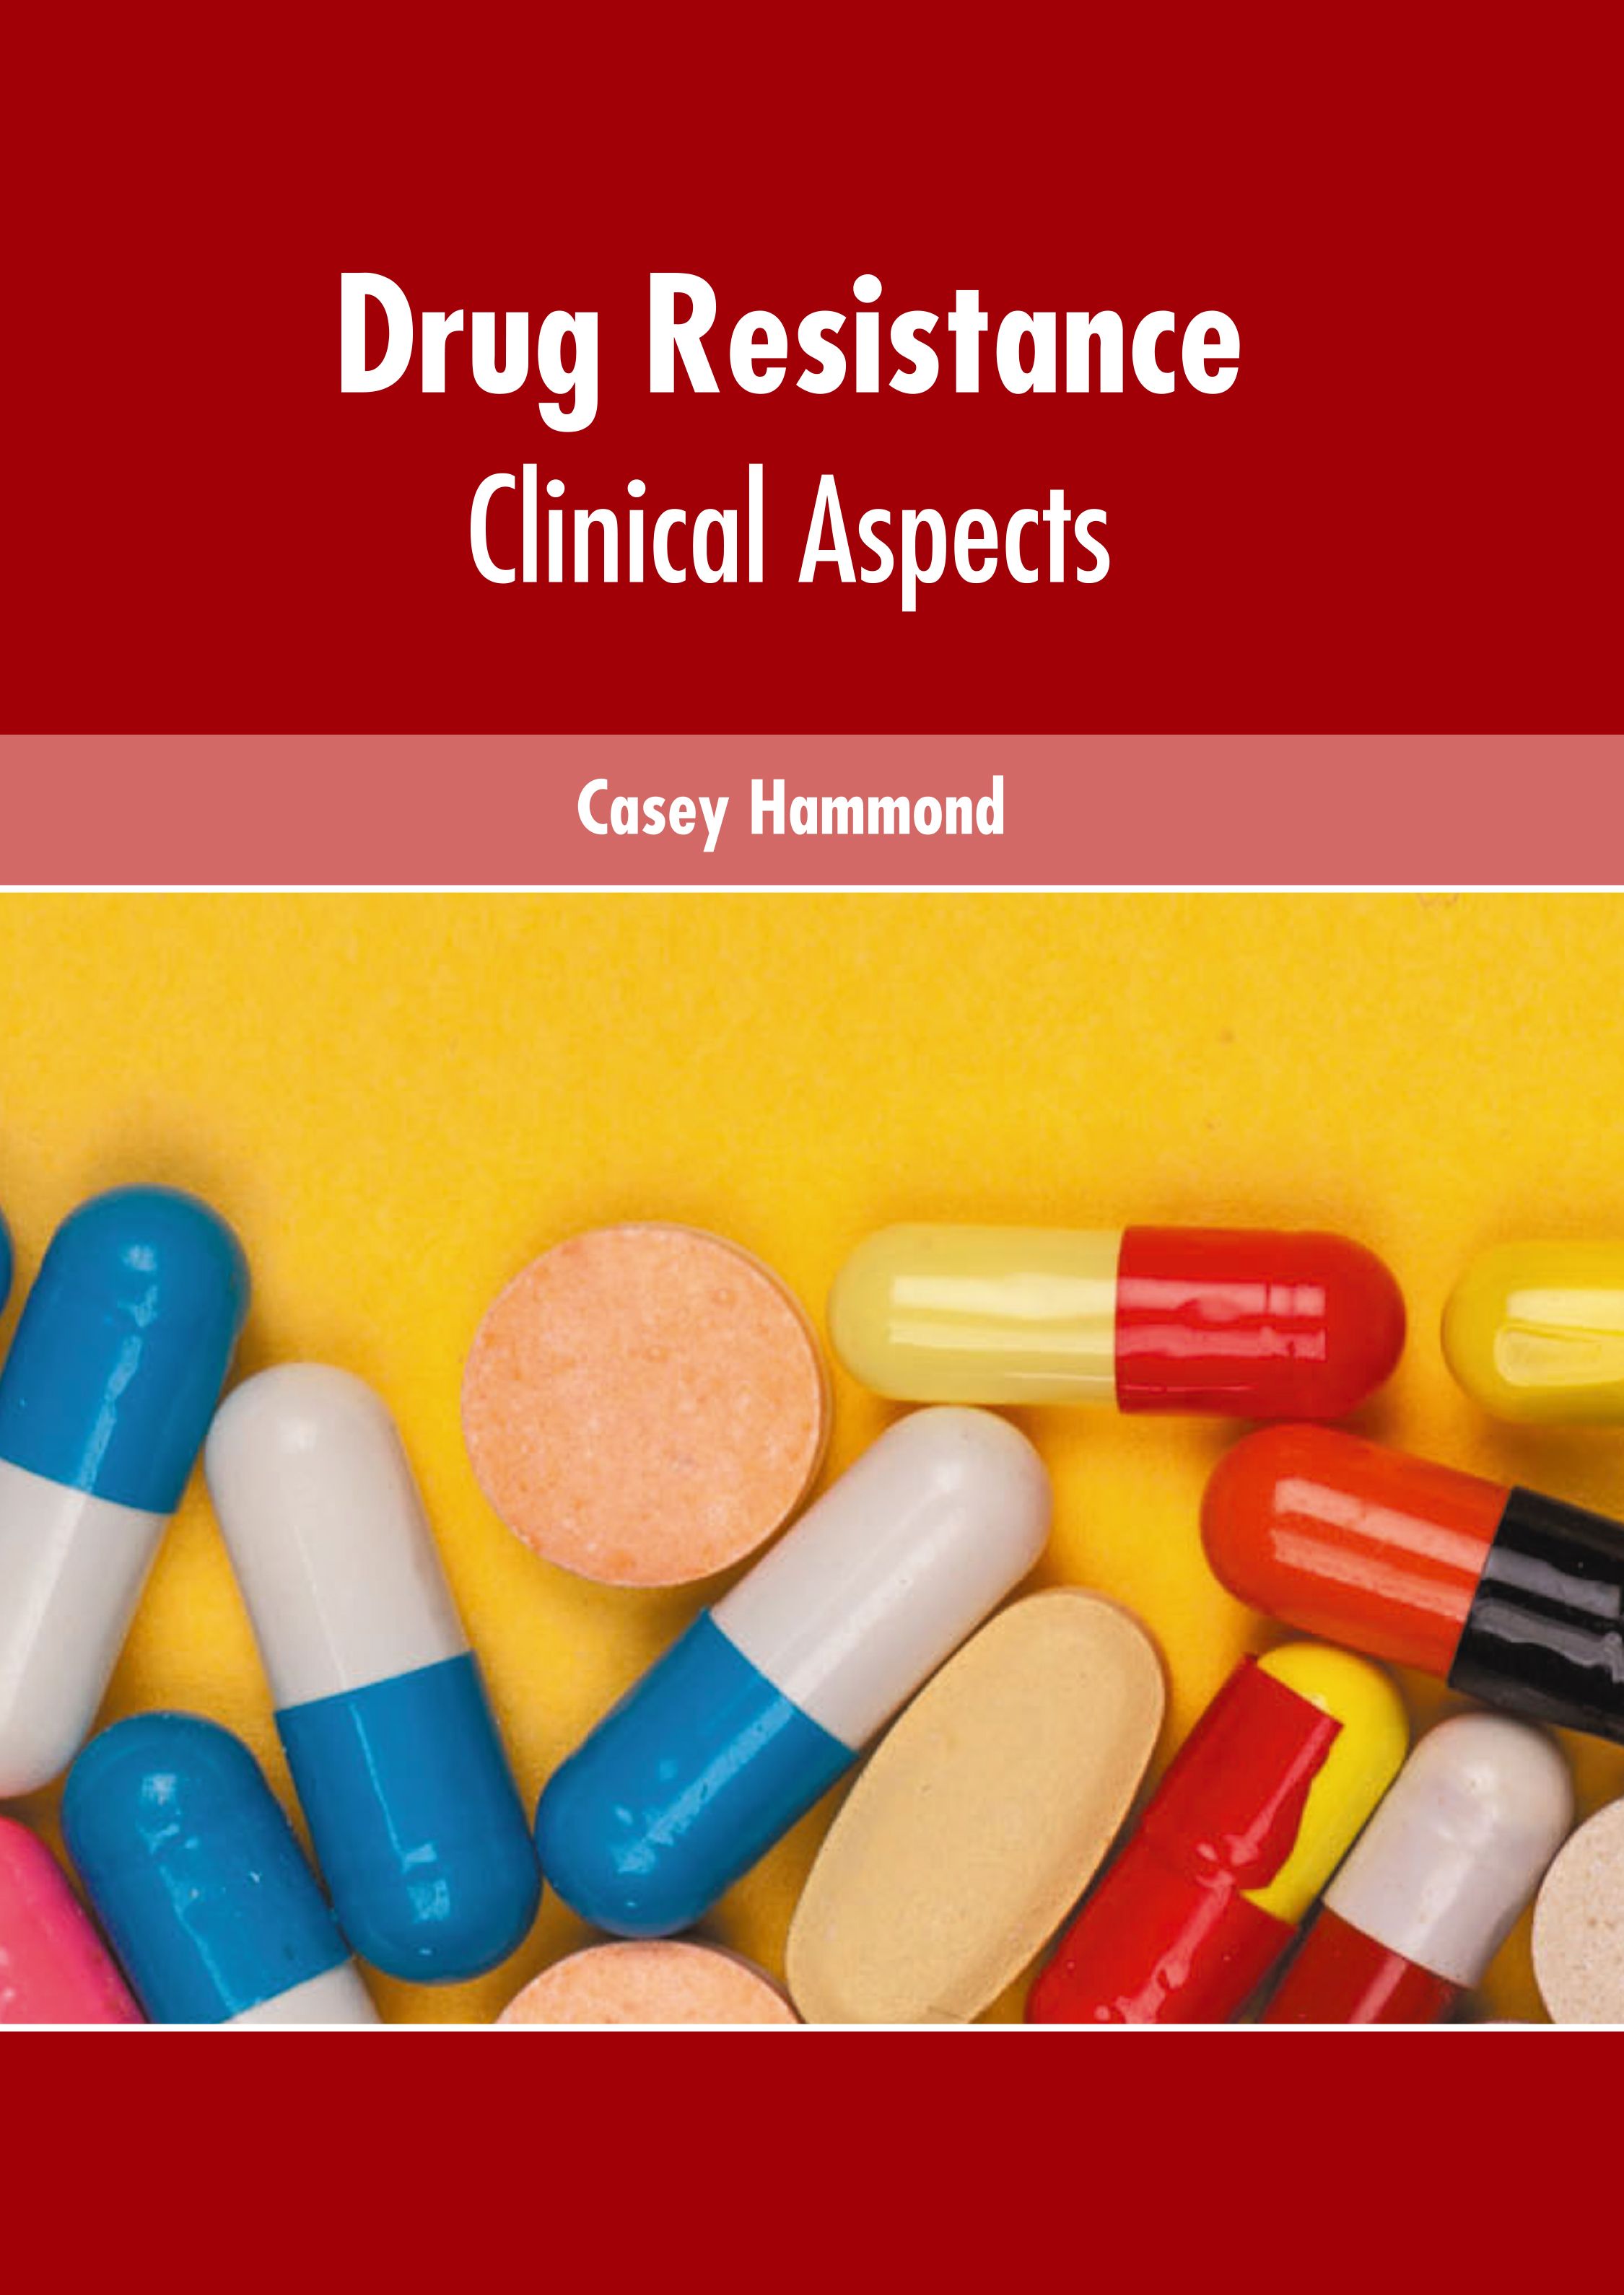 
exclusive-publishers/american-medical-publishers/drug-resistance-clinical-aspects-9781639272105